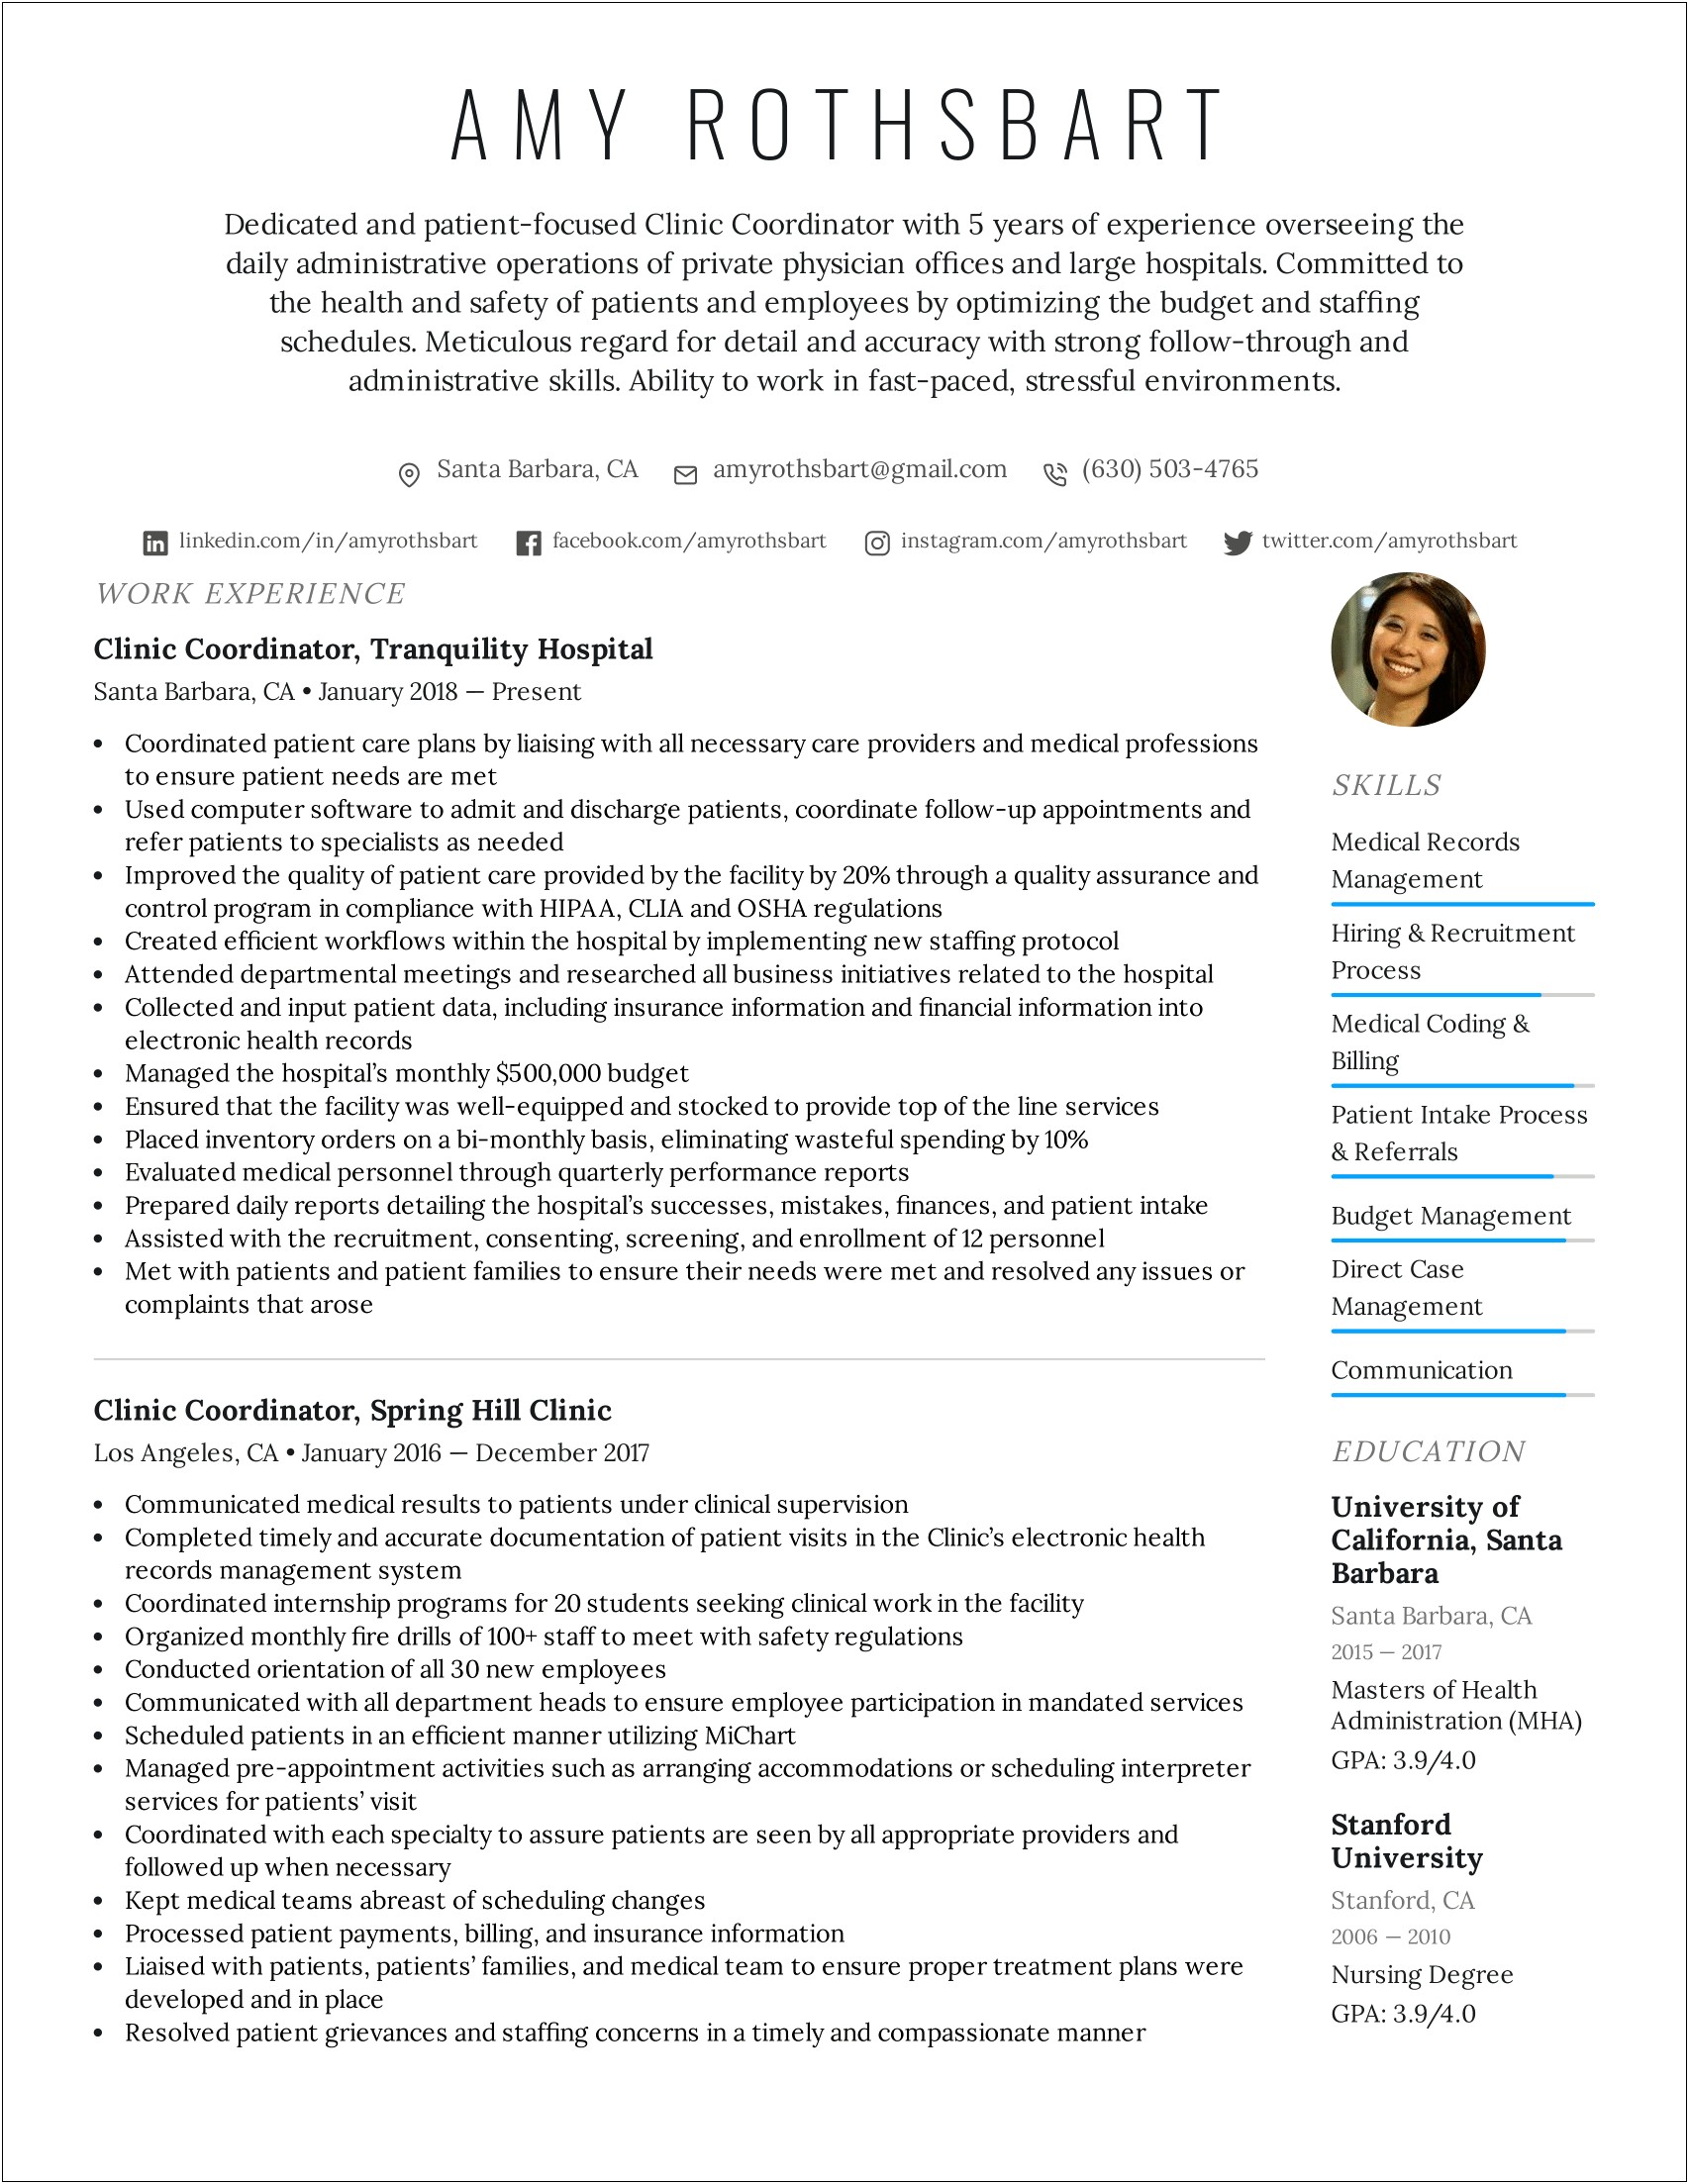 Clinical Research Coordinator Resume Objective Profile